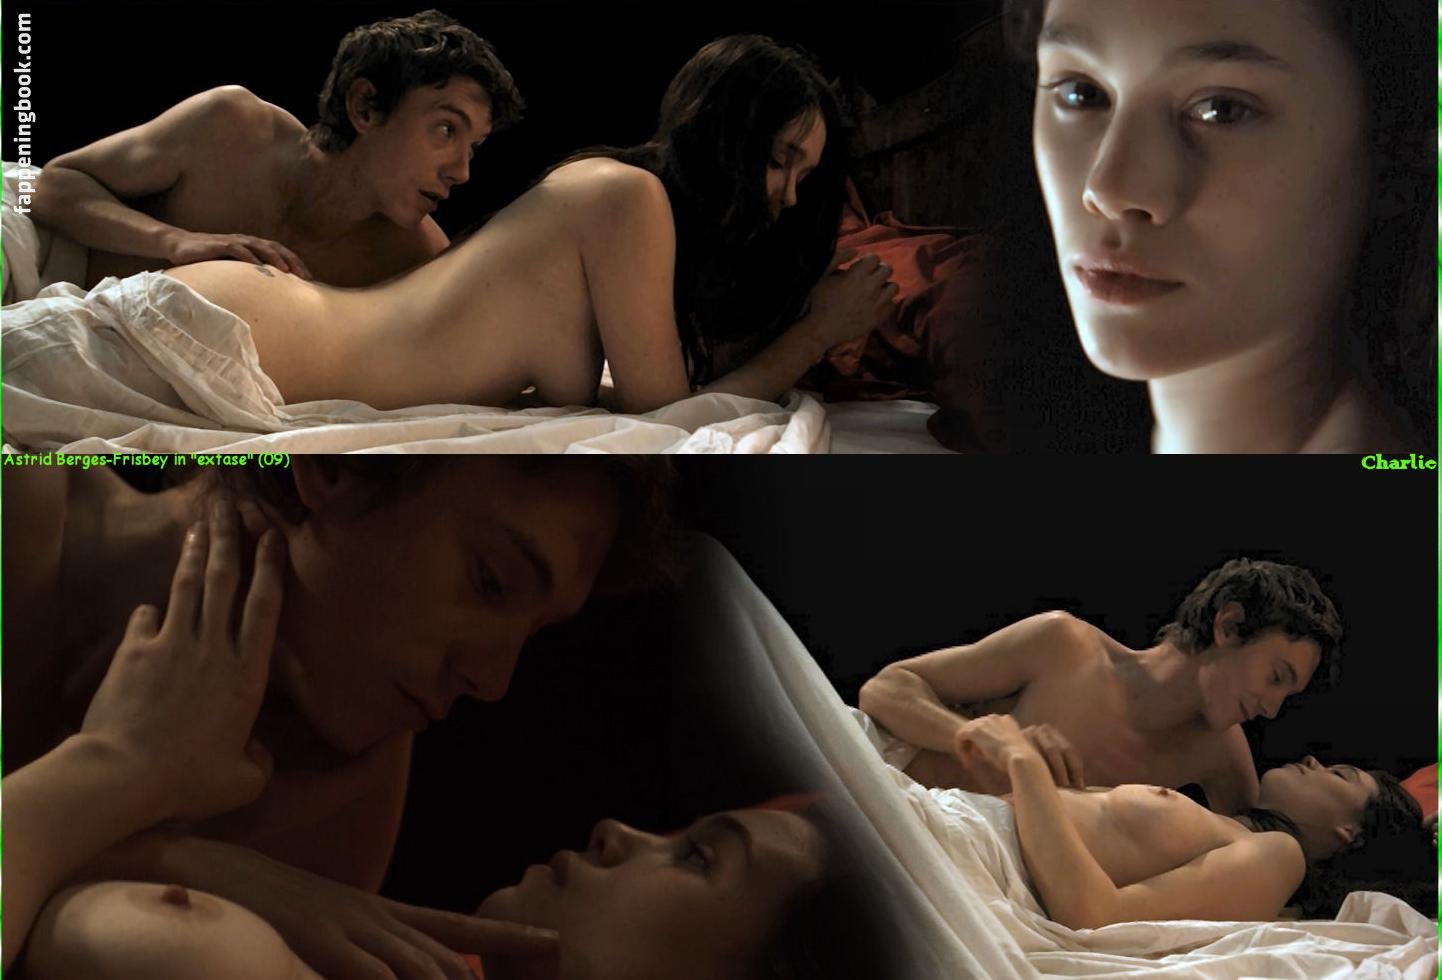 Astrid berges-frisbey naked